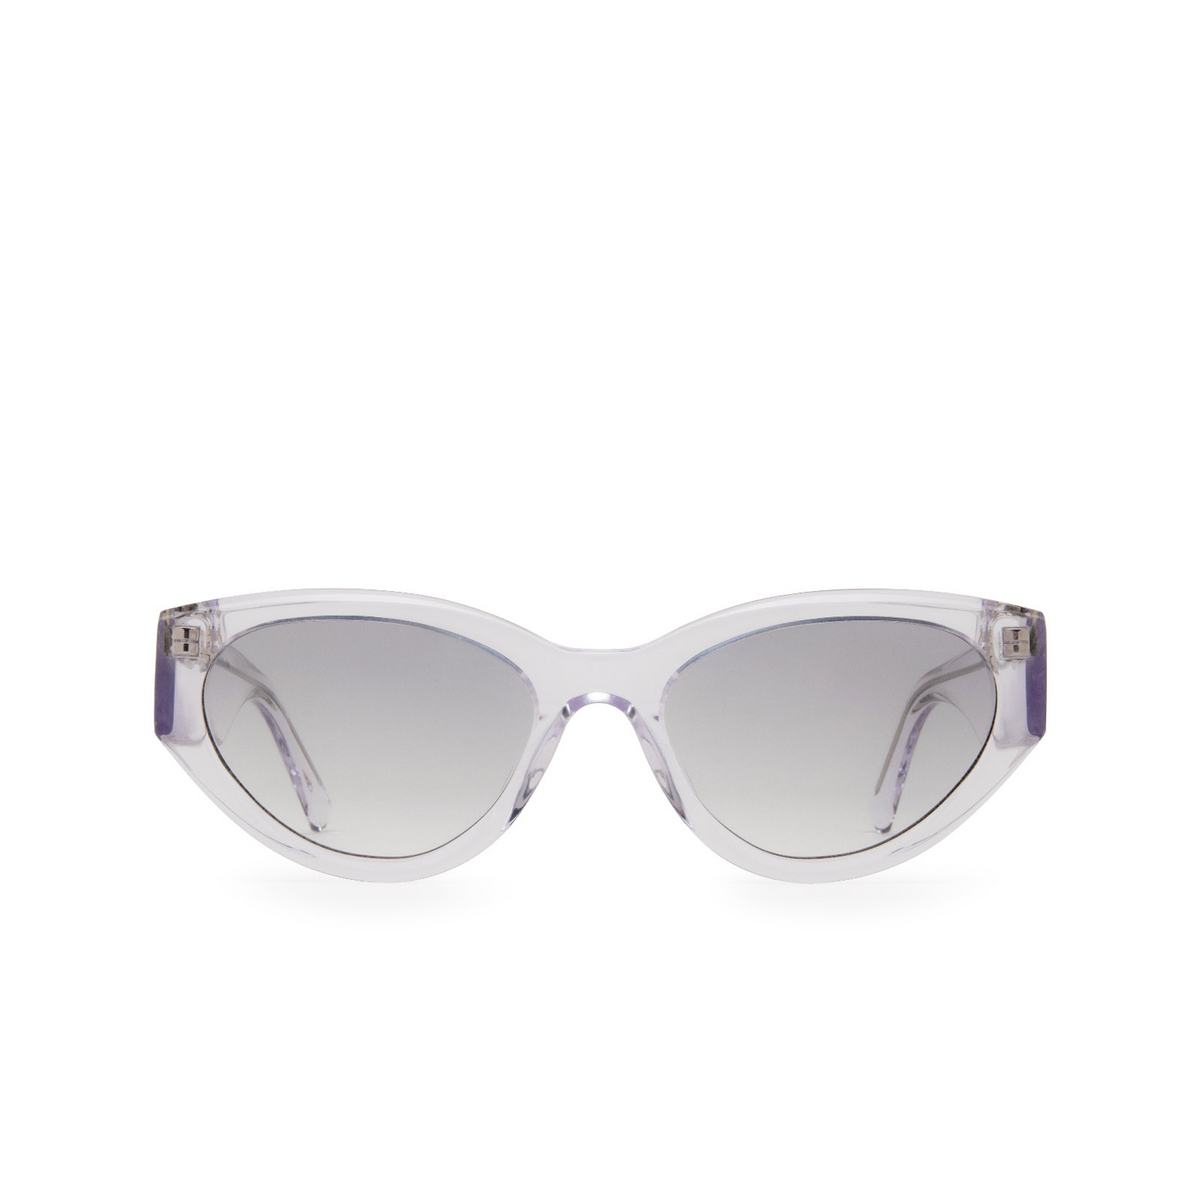 Chimi 06 Sunglasses CLEAR - front view